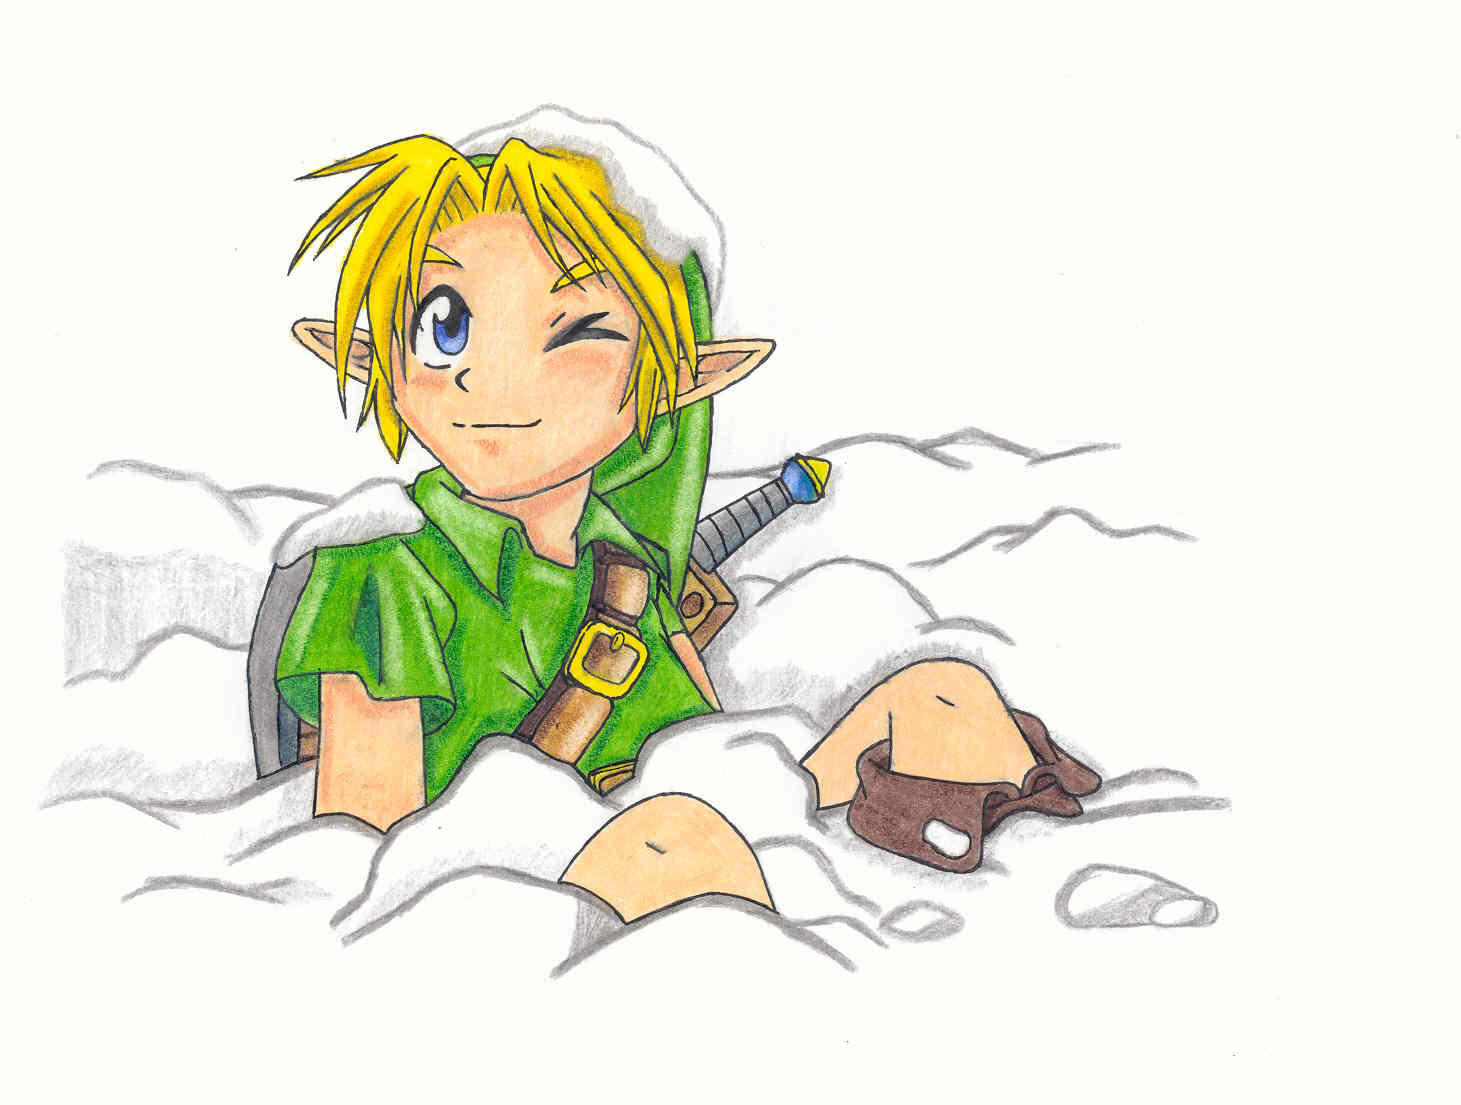 Link_in_the_snow_by_Cosmo4eva.jpg